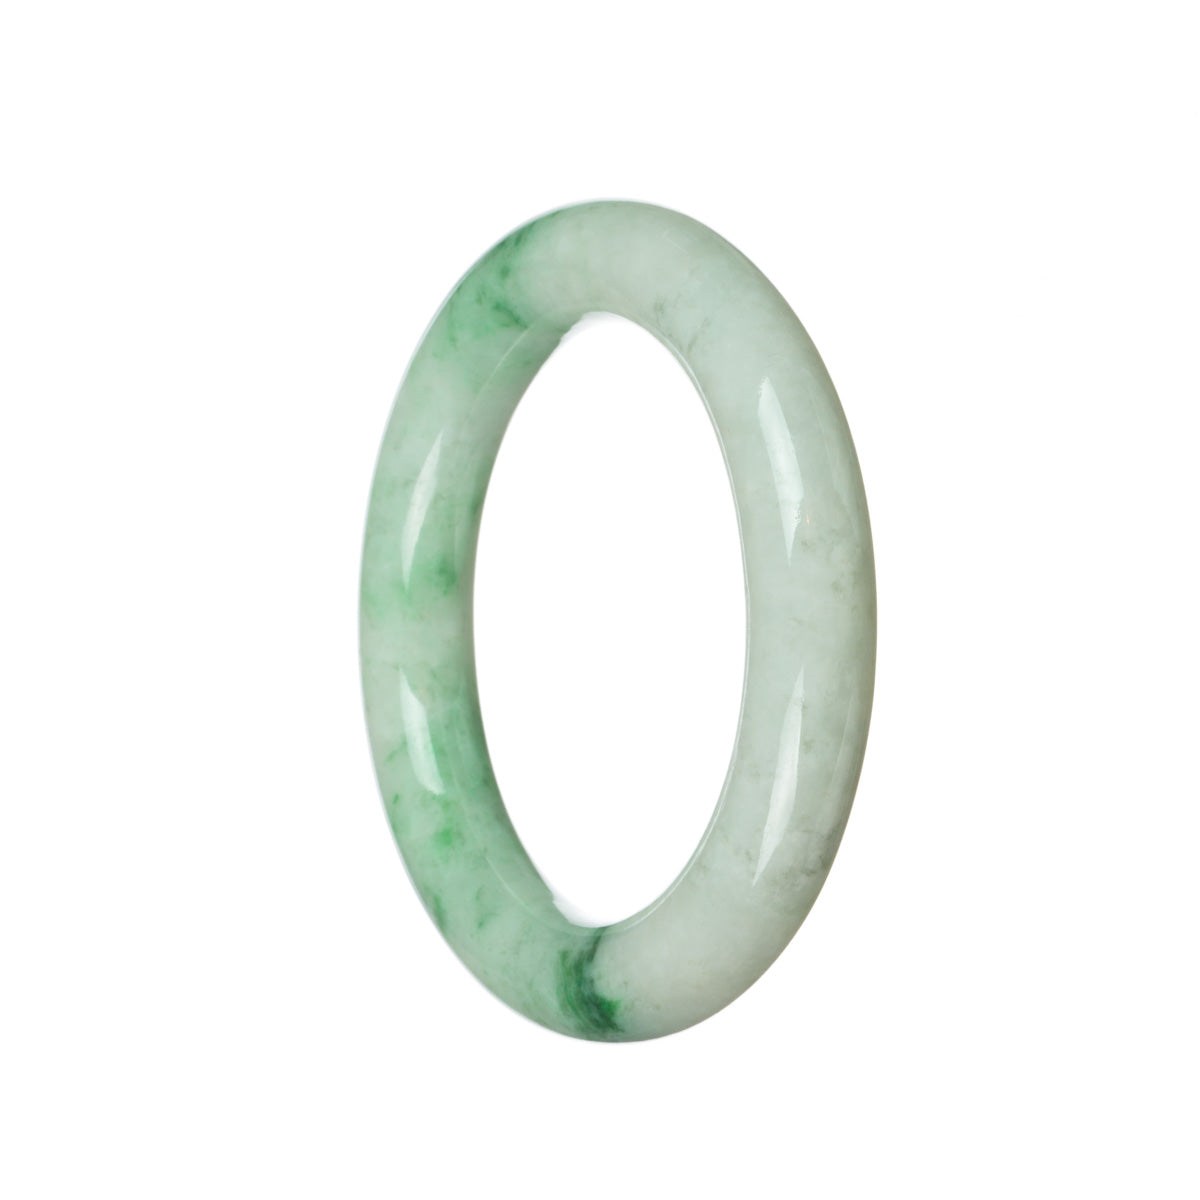 A close-up image of an exquisite jade bangle bracelet. The bracelet features a round shape with a 56mm diameter. The jadeite jade is a stunning shade of white with beautiful emerald green accents. This high-quality, authentic piece is from the MAYS™ collection.